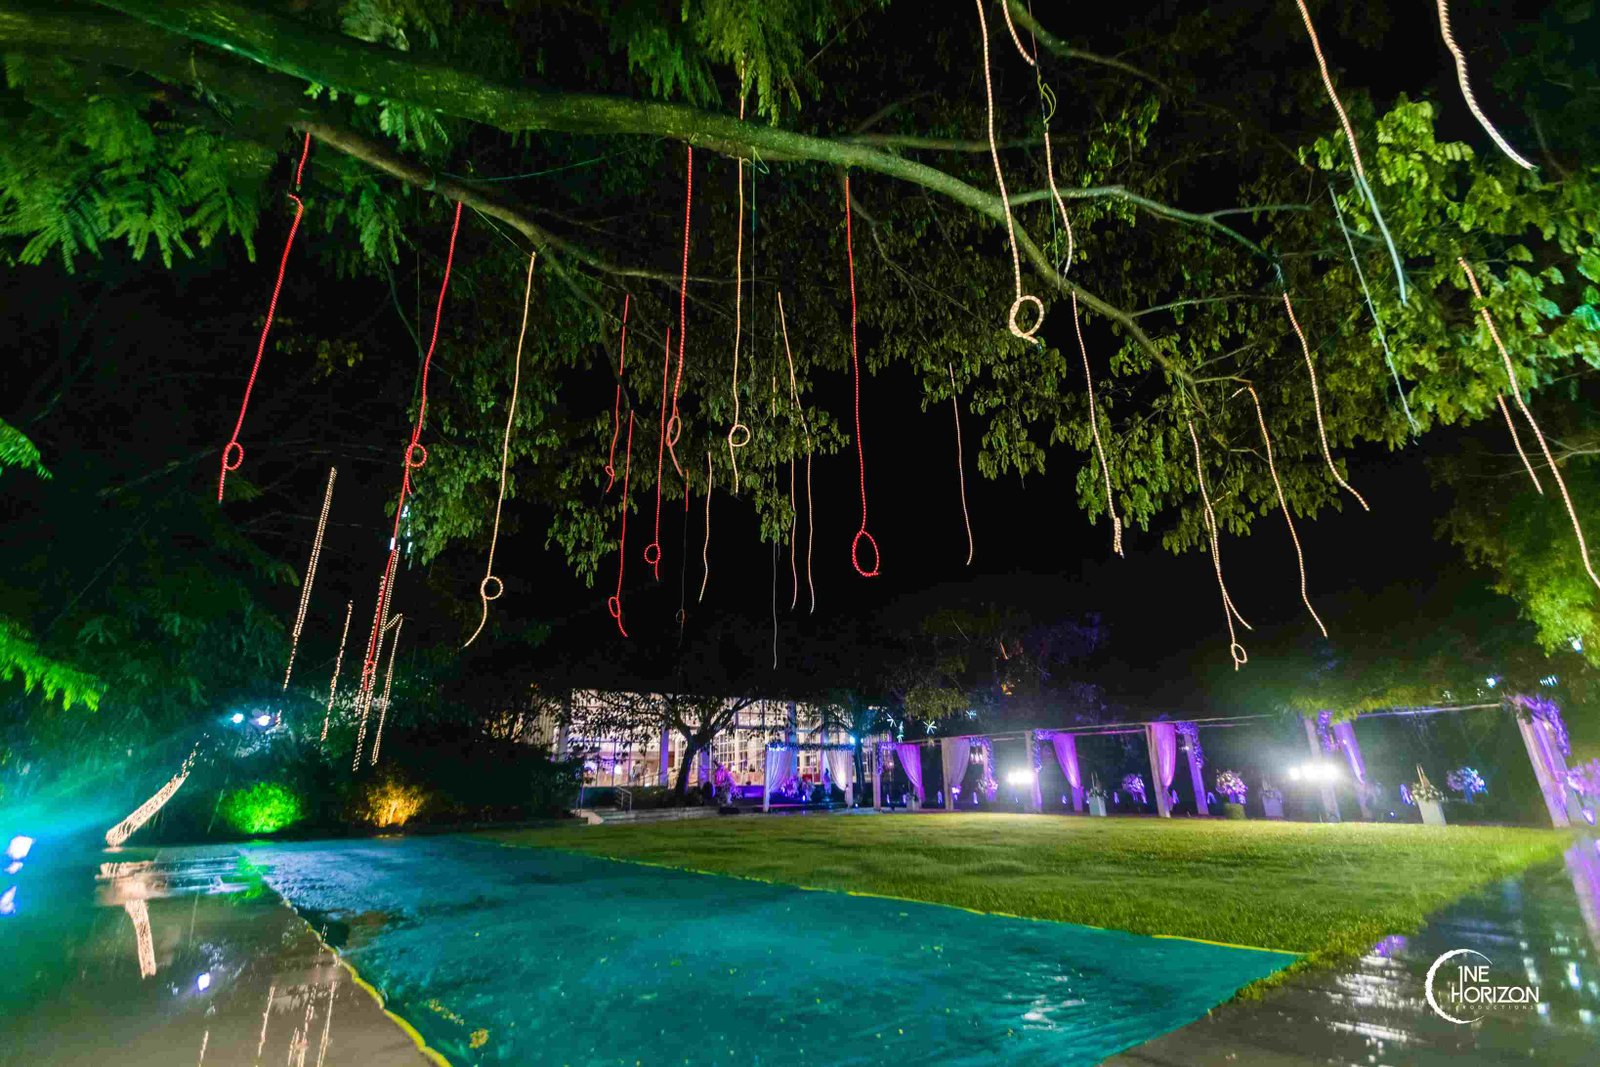 Night view of poolside and wedding lawn at White Petals, Palace Grounds Bangalore